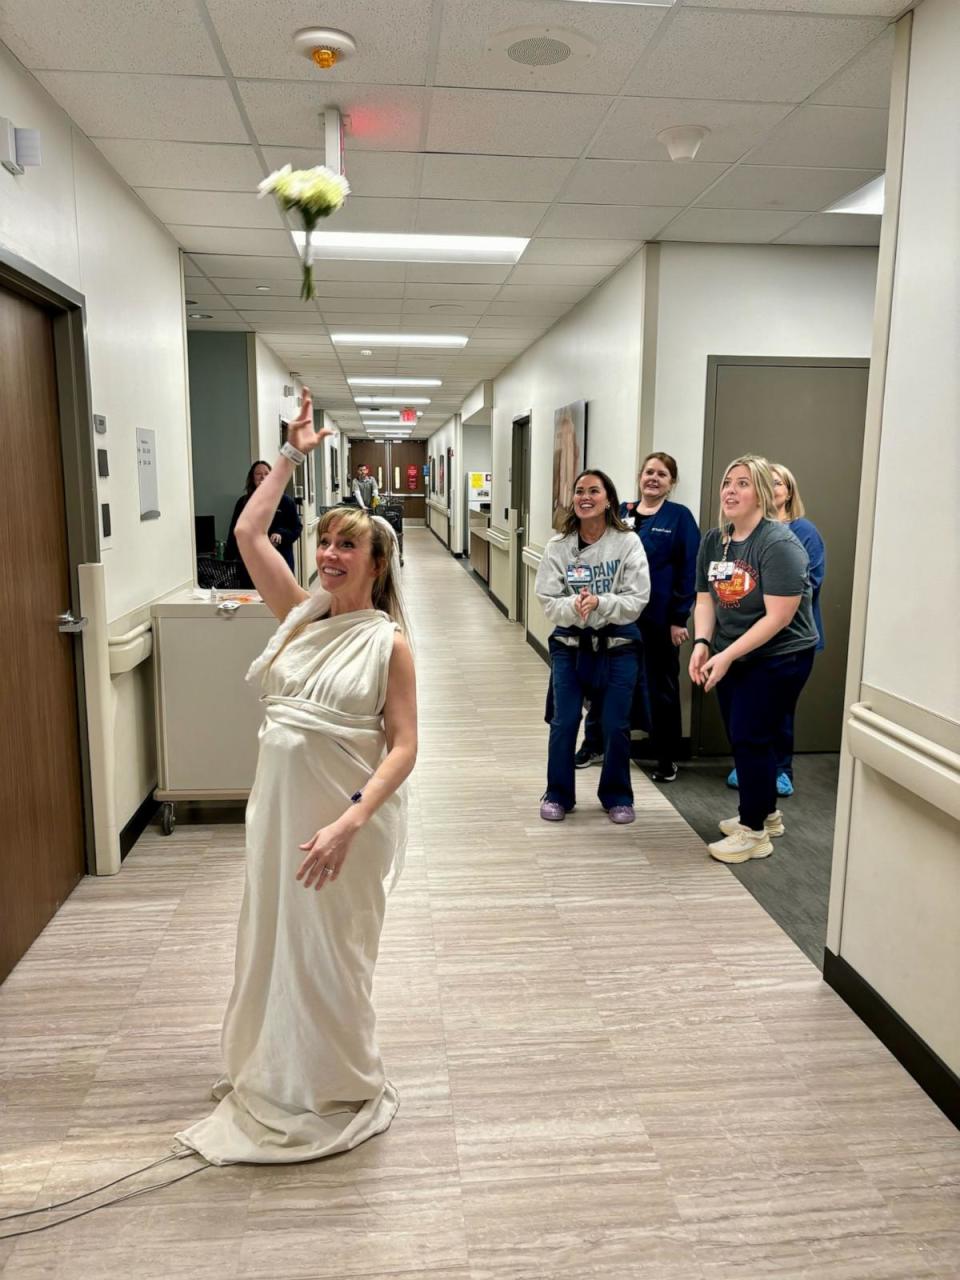 PHOTO: Sara Perry wore a wedding gown and veil fashioned from hospital linen and even had a bouquet toss with hospital nurses participating in the tradition. (Courtesy of Saint Luke’s East Hospital)